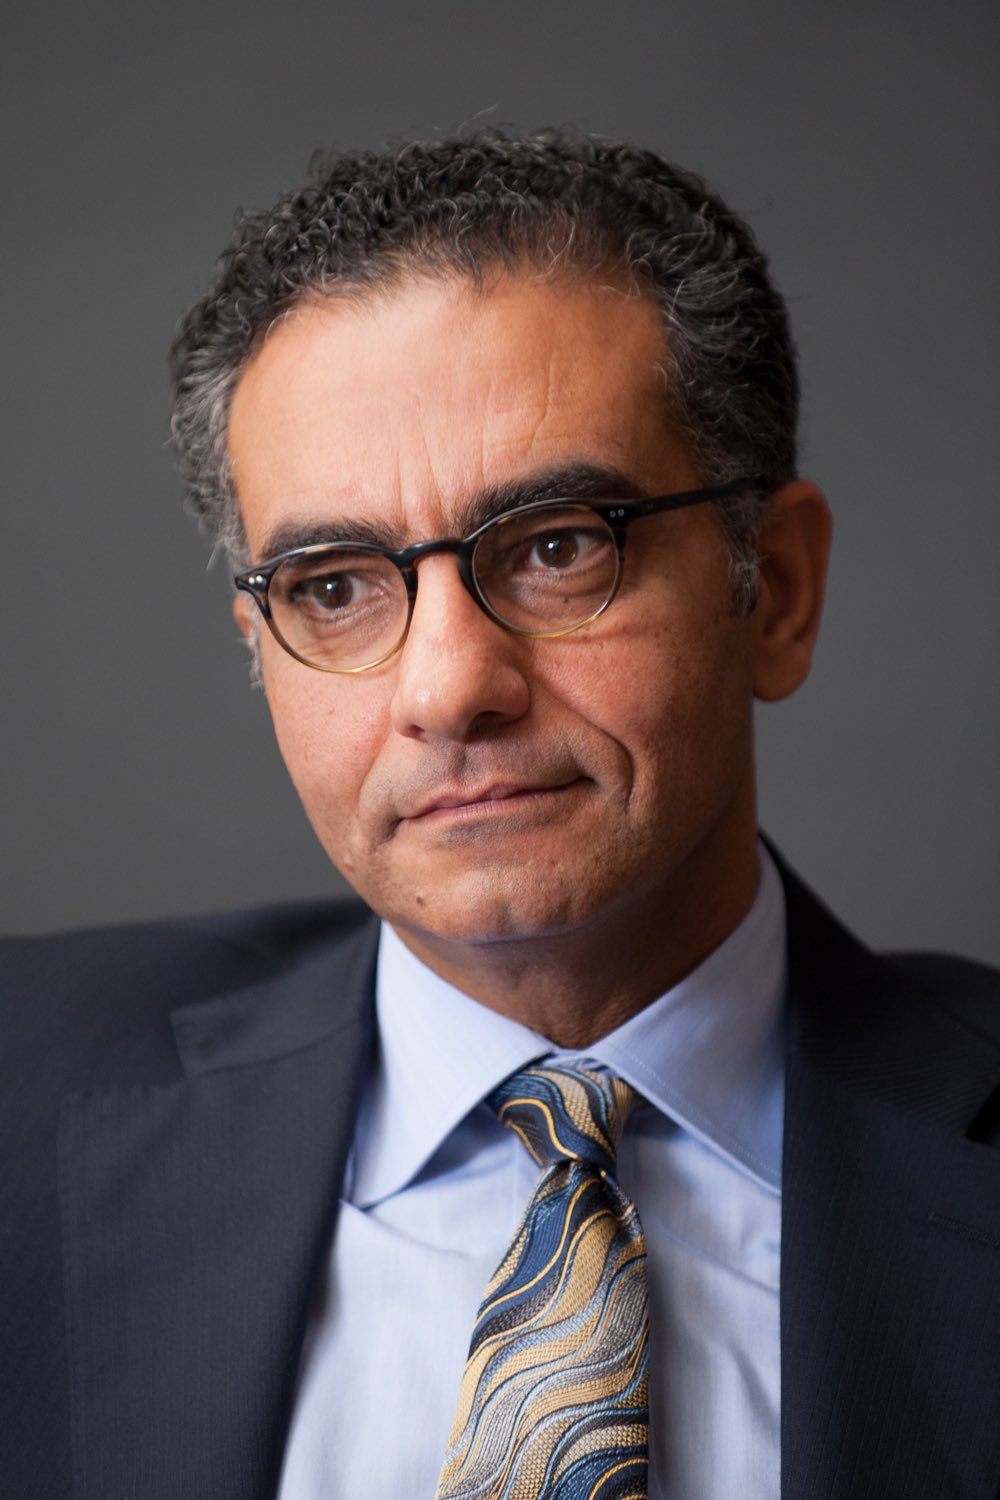 ICANN&#39;s current CEO and President Fadi Chehadé has announced today that he will be departing the organisation in March 2016. - fadi-chehade-icann-ceo